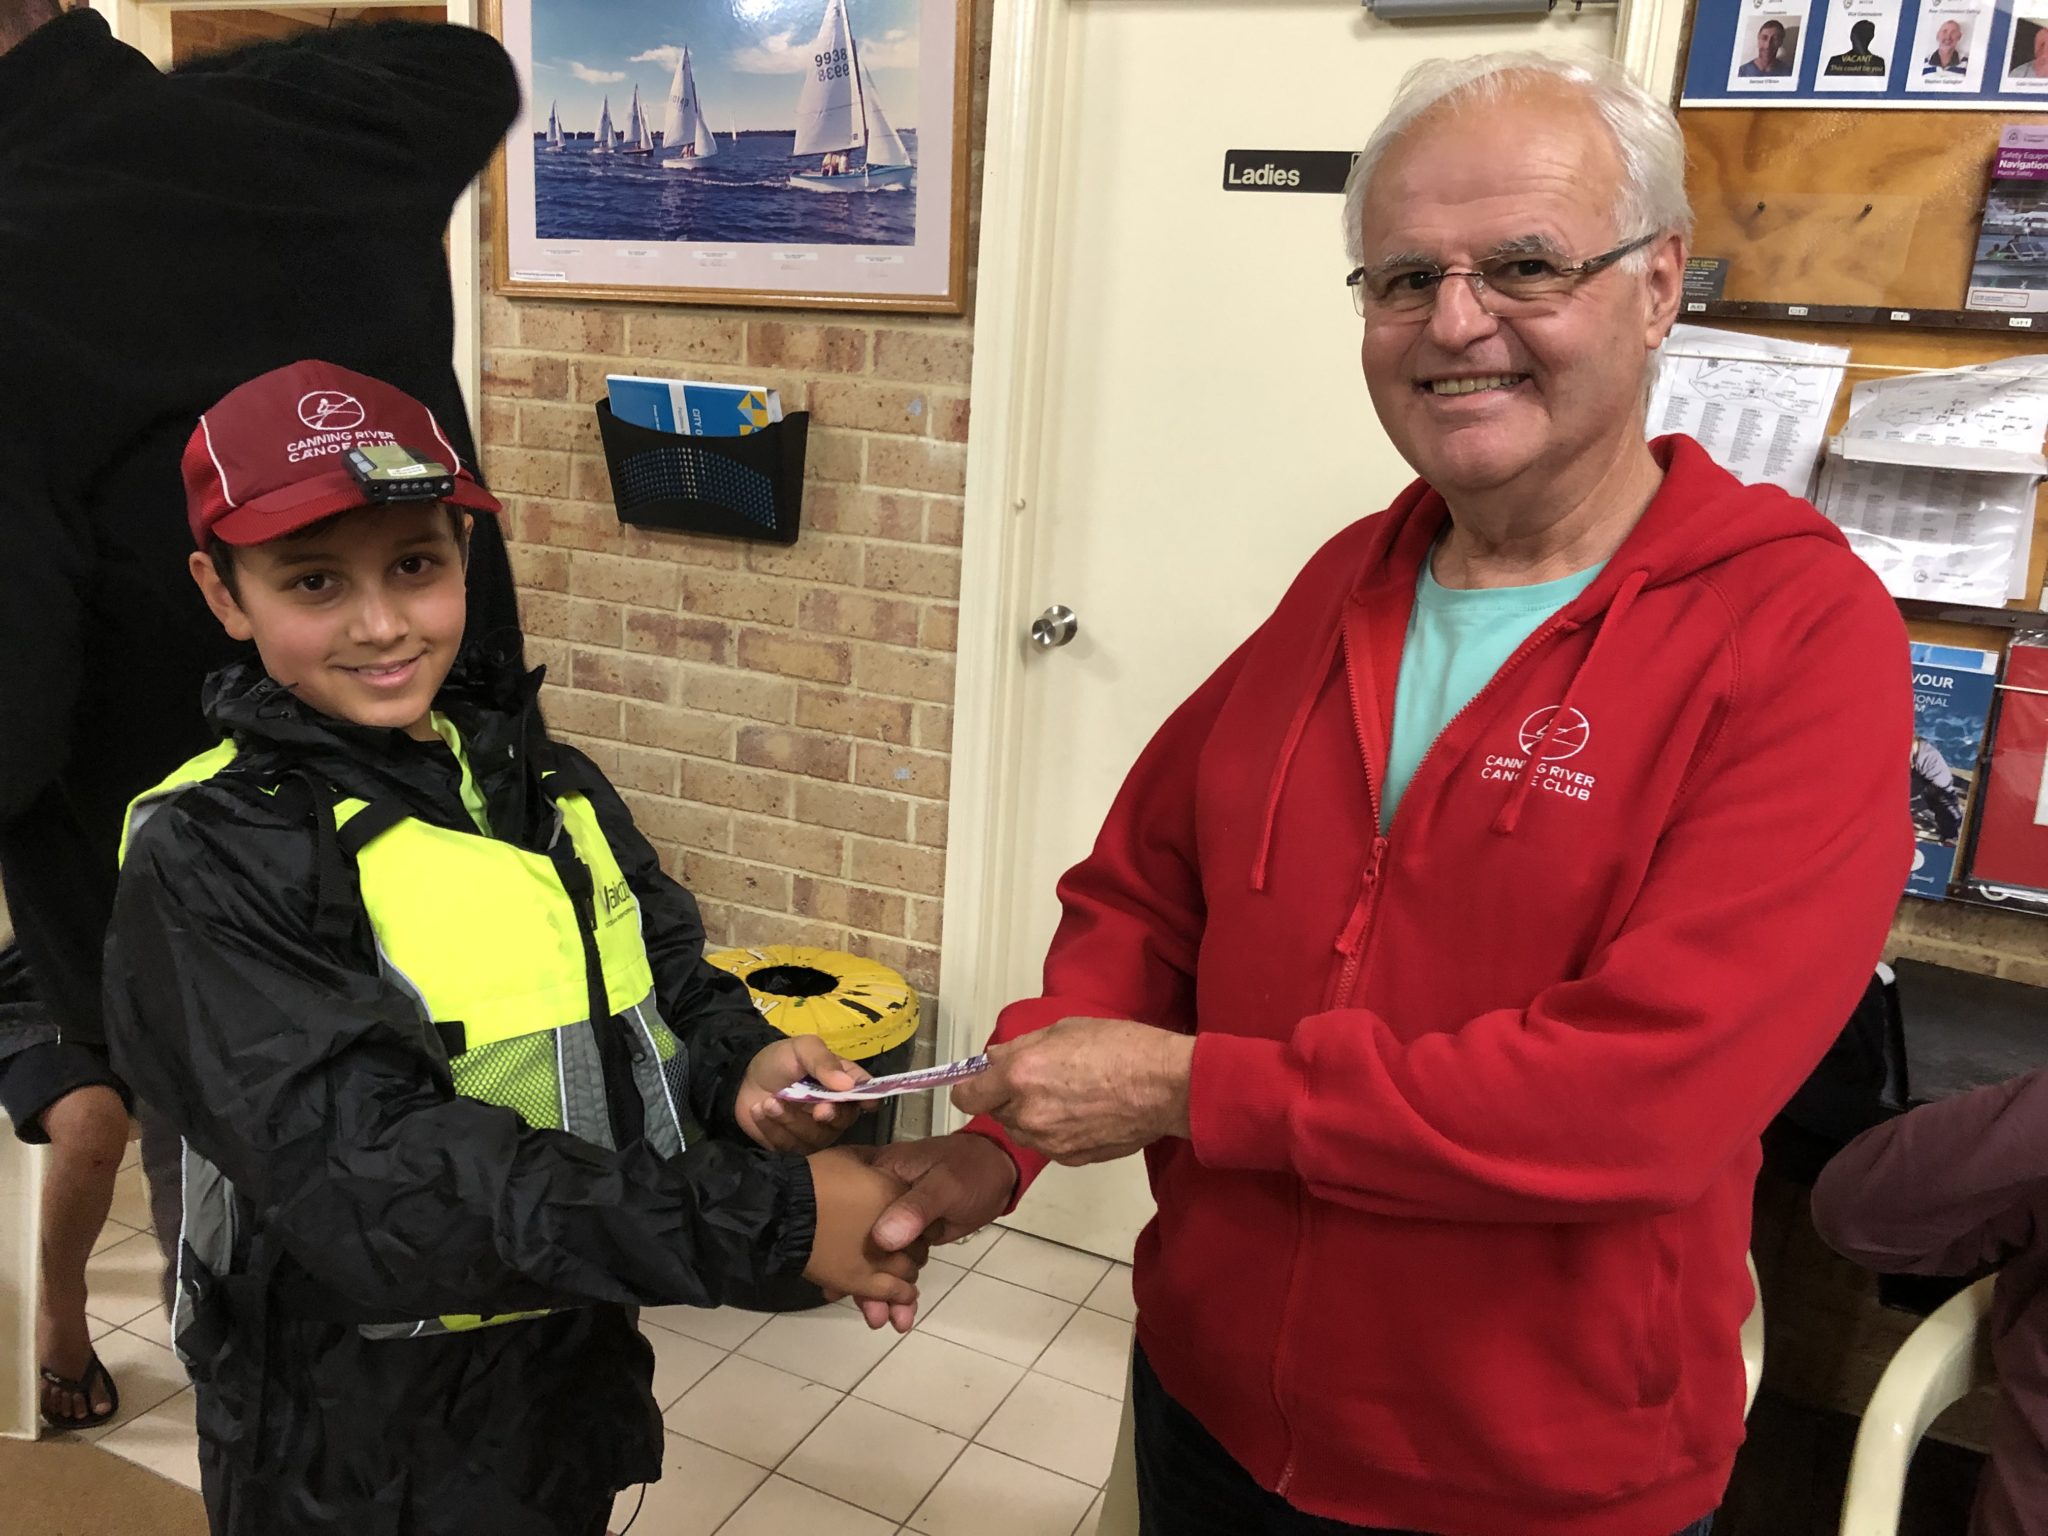 Tuesday 16th April 2019 : Tonight’s photo shows club member Les Siemen presenting Connor Jacob with the winners movie voucher. 